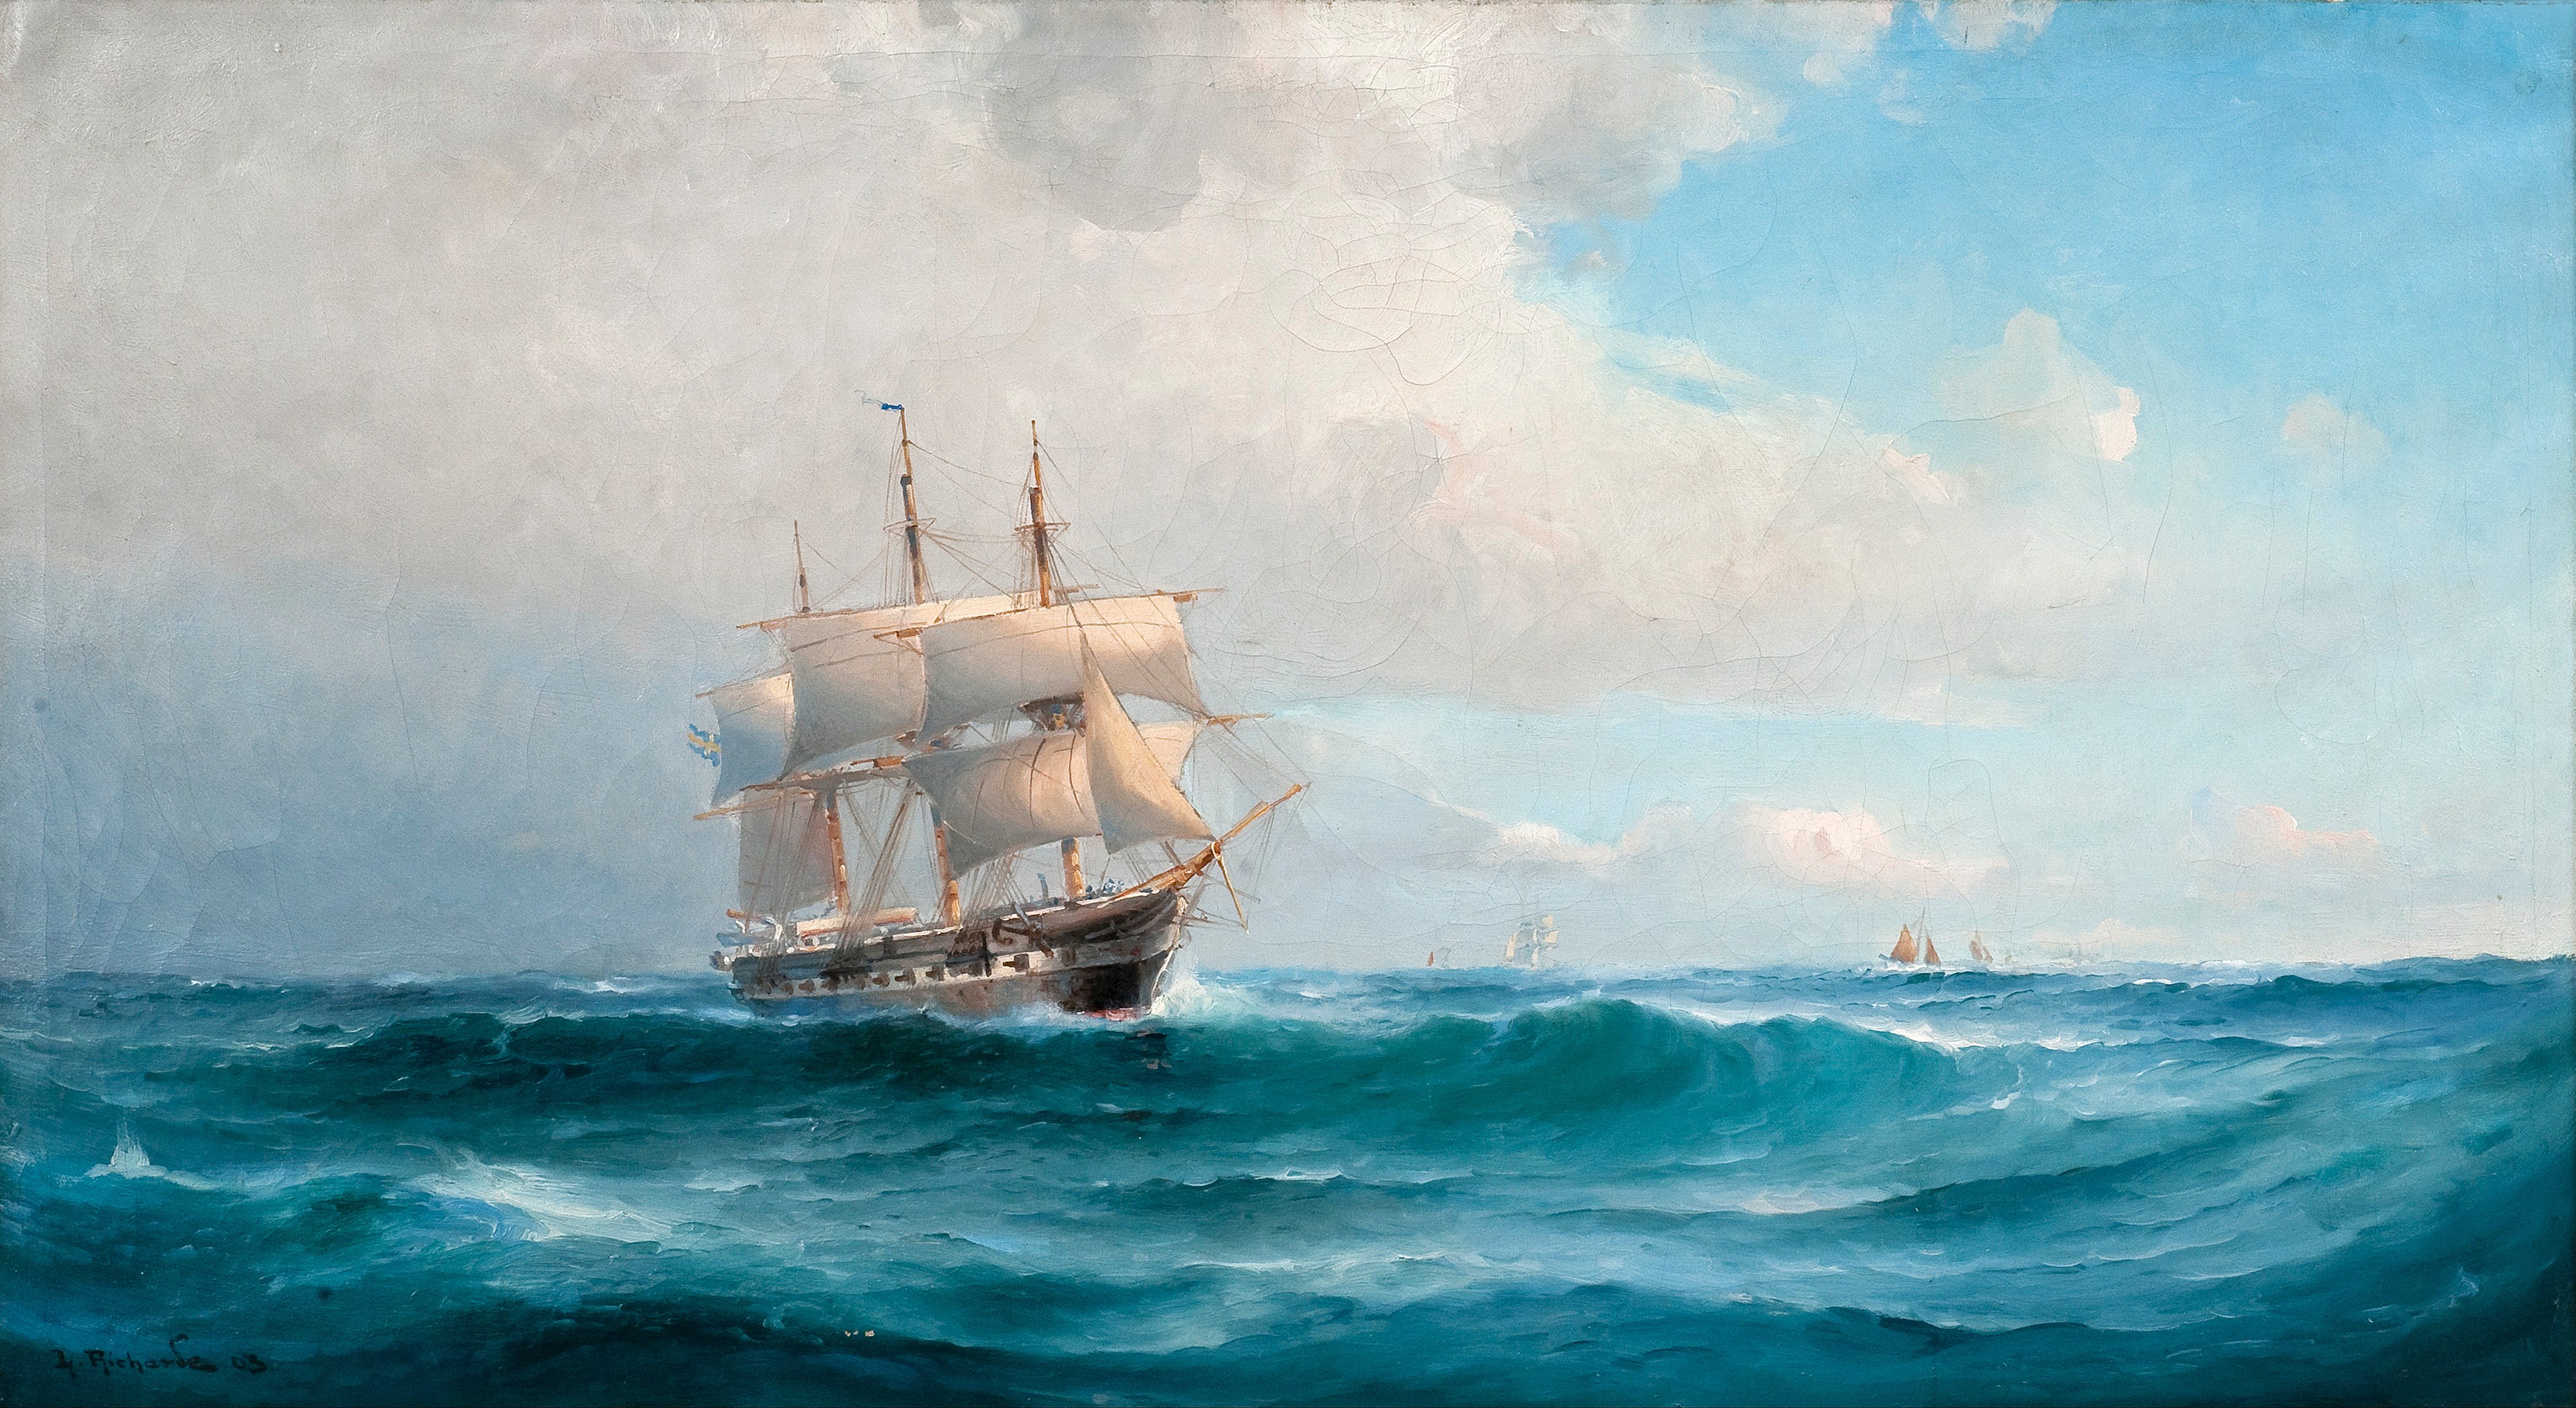 Oil Painting Ship 4k Ultra HD Wallpaper Background Image